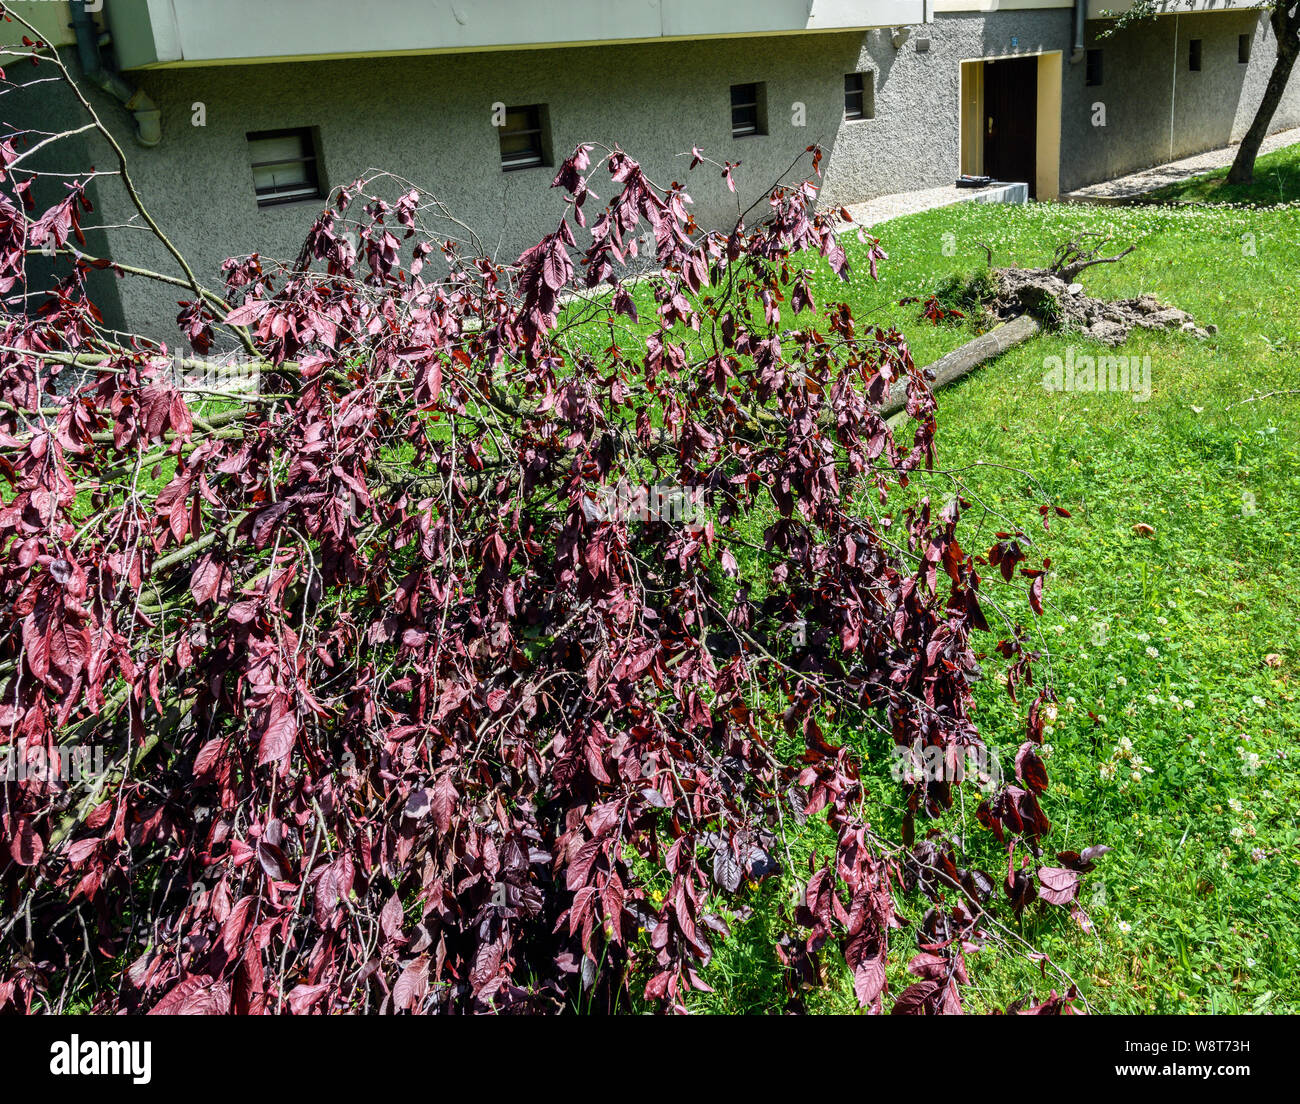 Uprooted Sargent's cherry tree after storm, June 2019, Alsace, France, Europe, Stock Photo